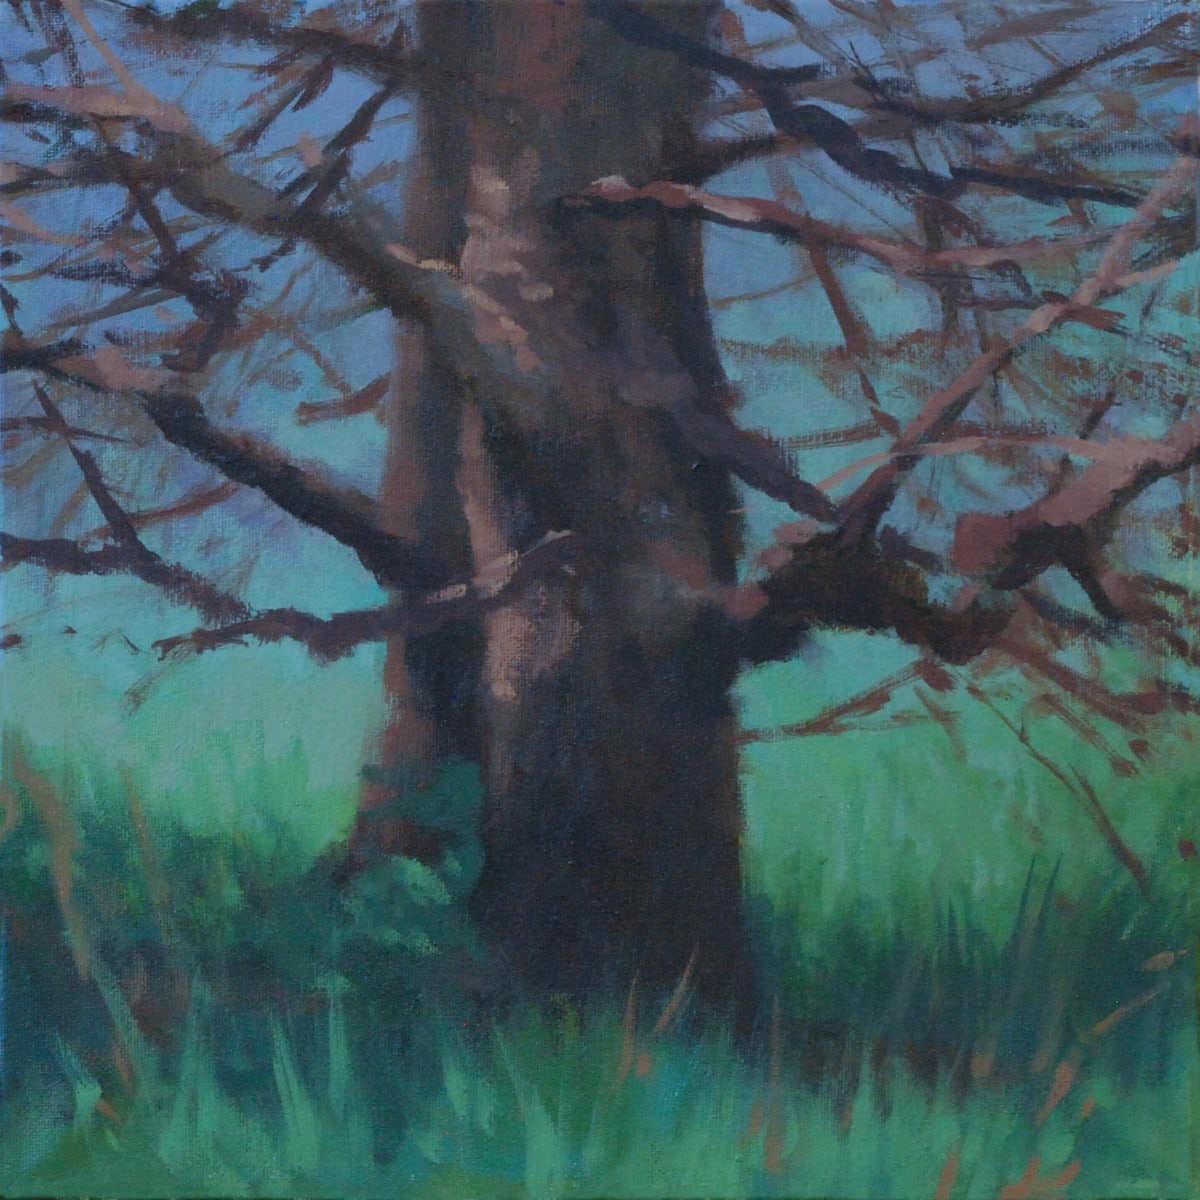 Tangled Branches, Study, Stroud Series by Gregory Blue 